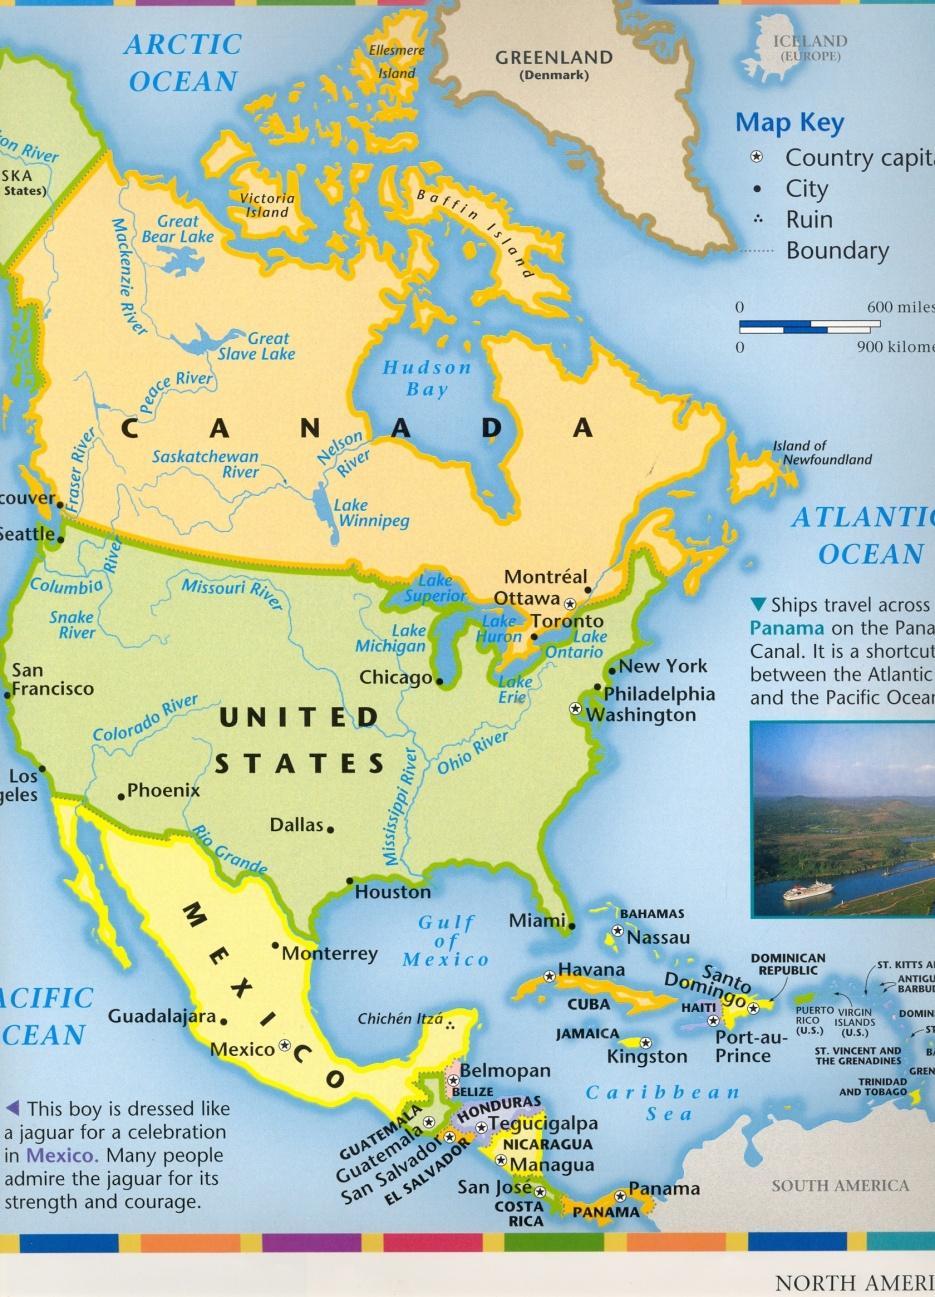 This political map of North America shows its countries and their borders.